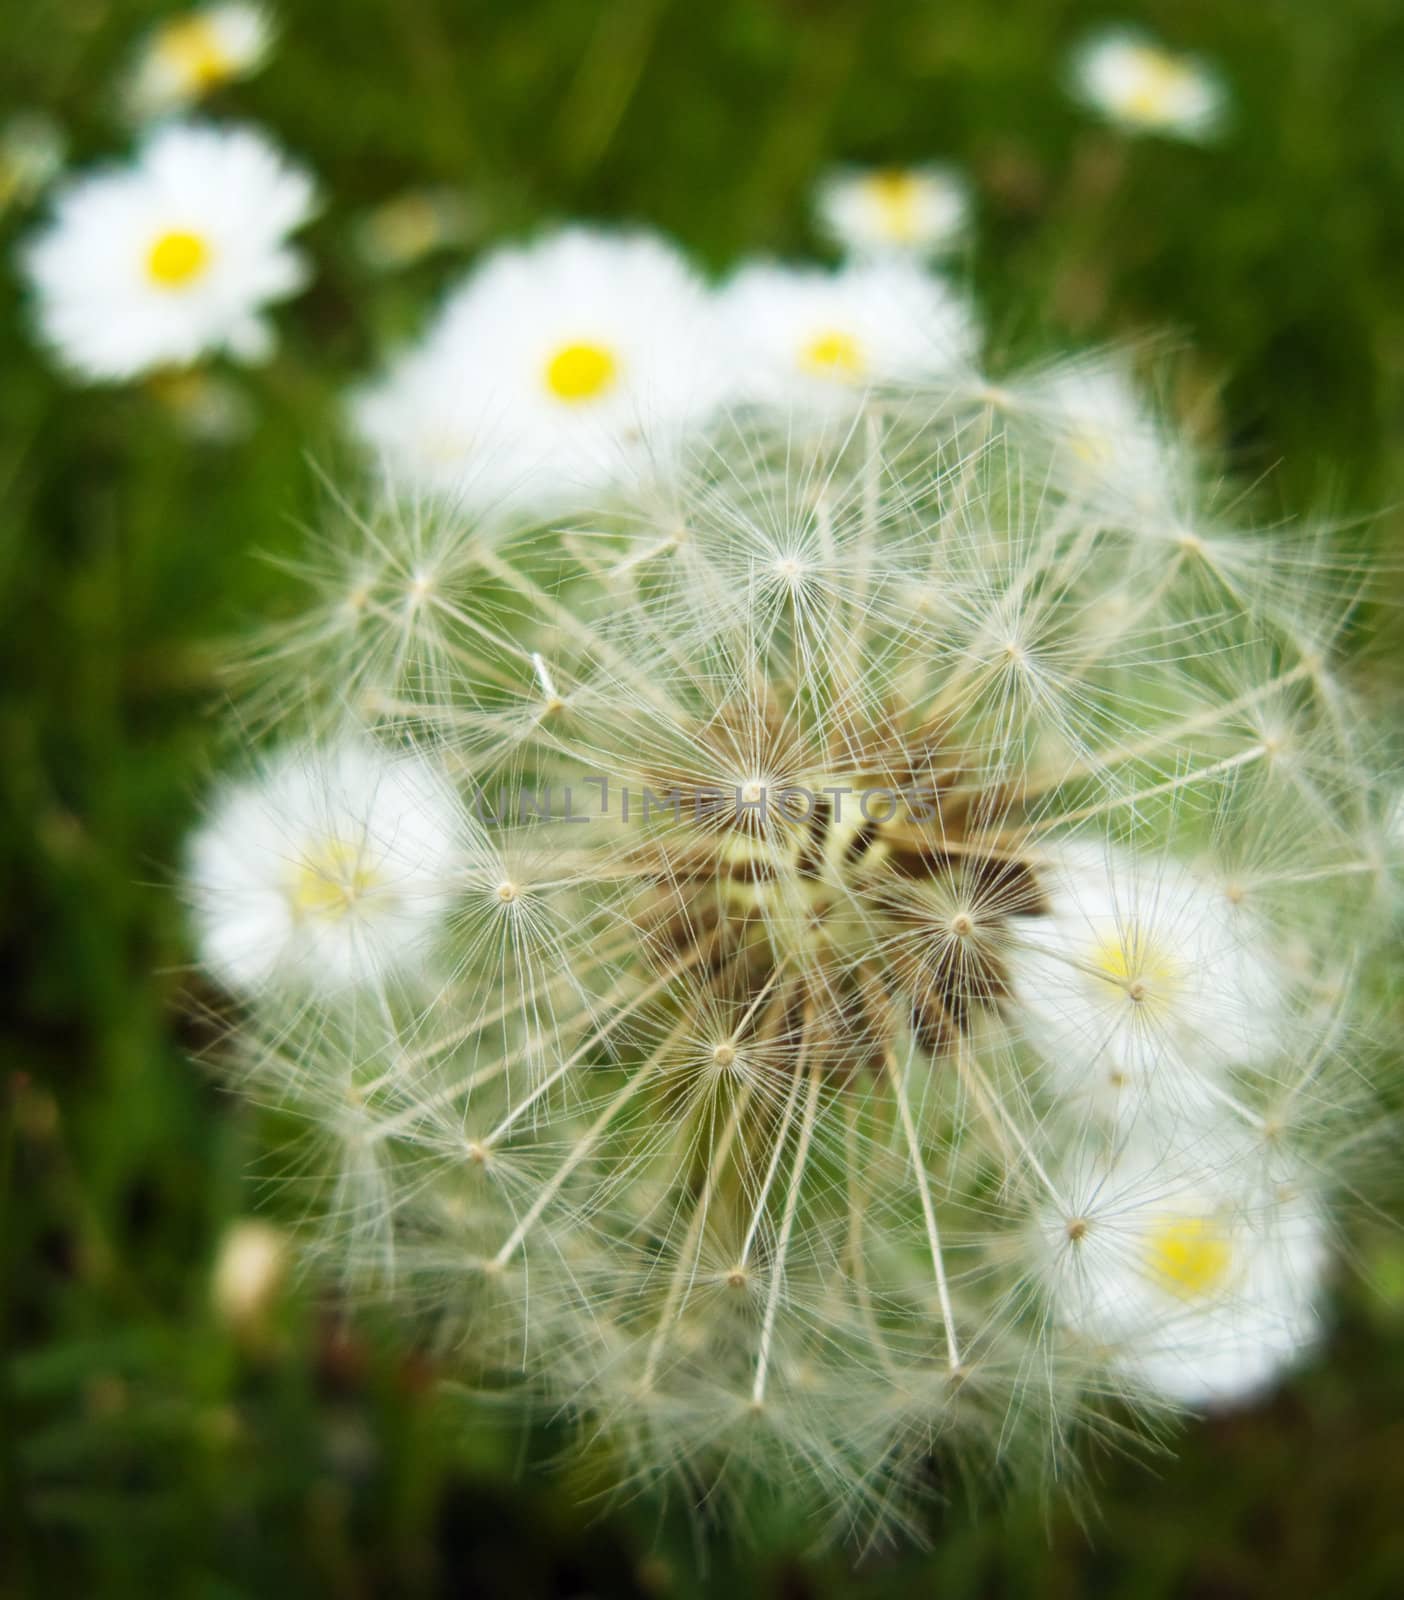 dandelion and daisies in green grass